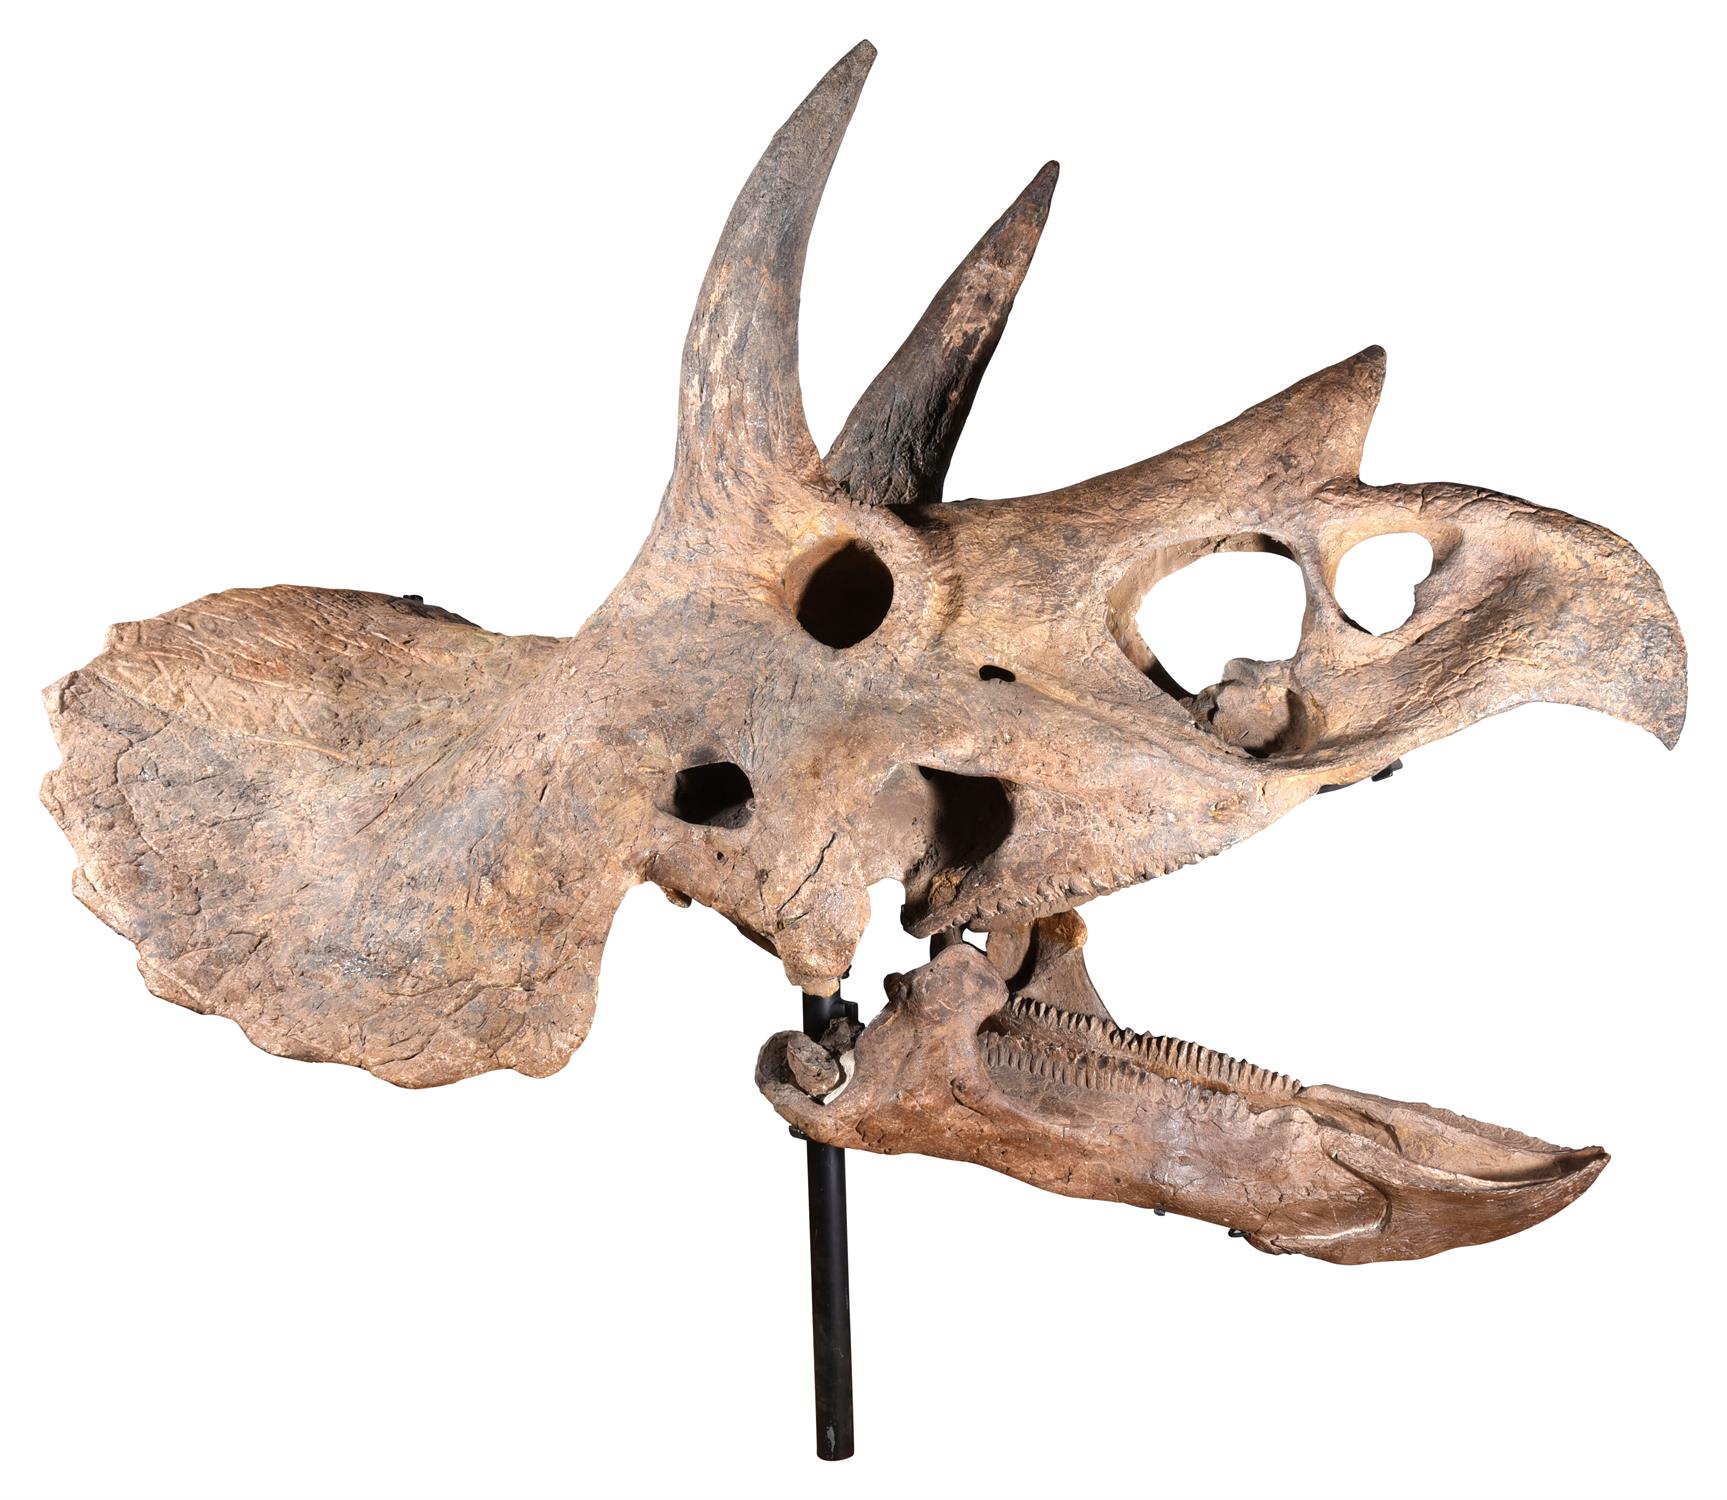 THE SKULL OF A TRICERATOPS, HELL CREEK FORMATION - Image 3 of 12